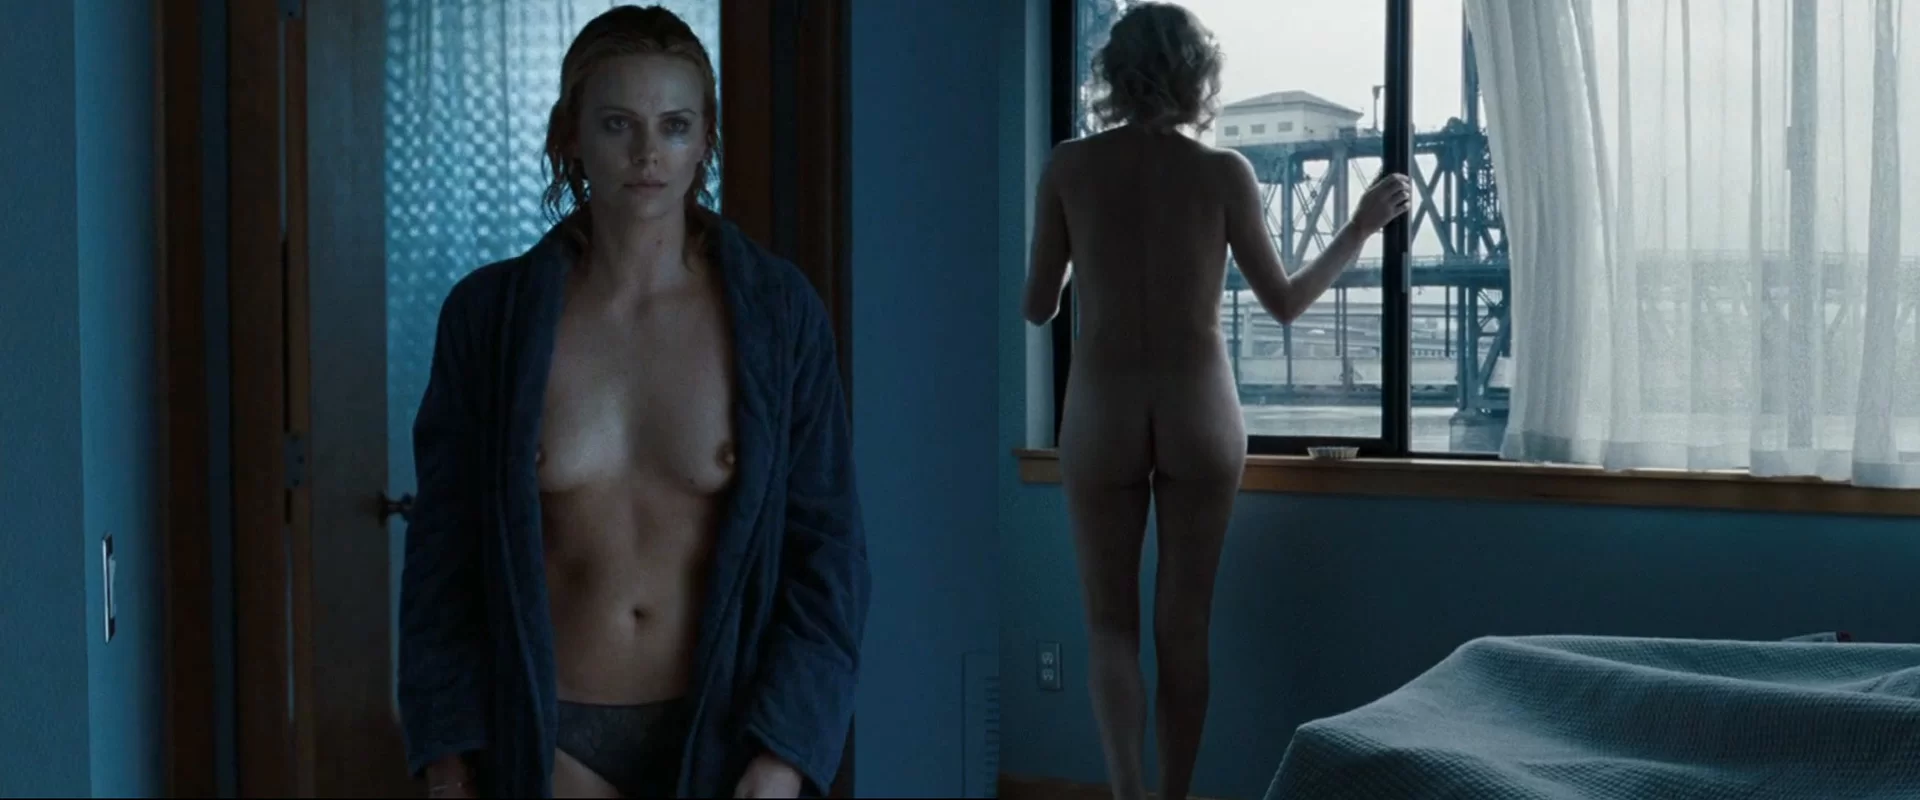 Theron nude charlize monster *UNCENSORED* Charlize